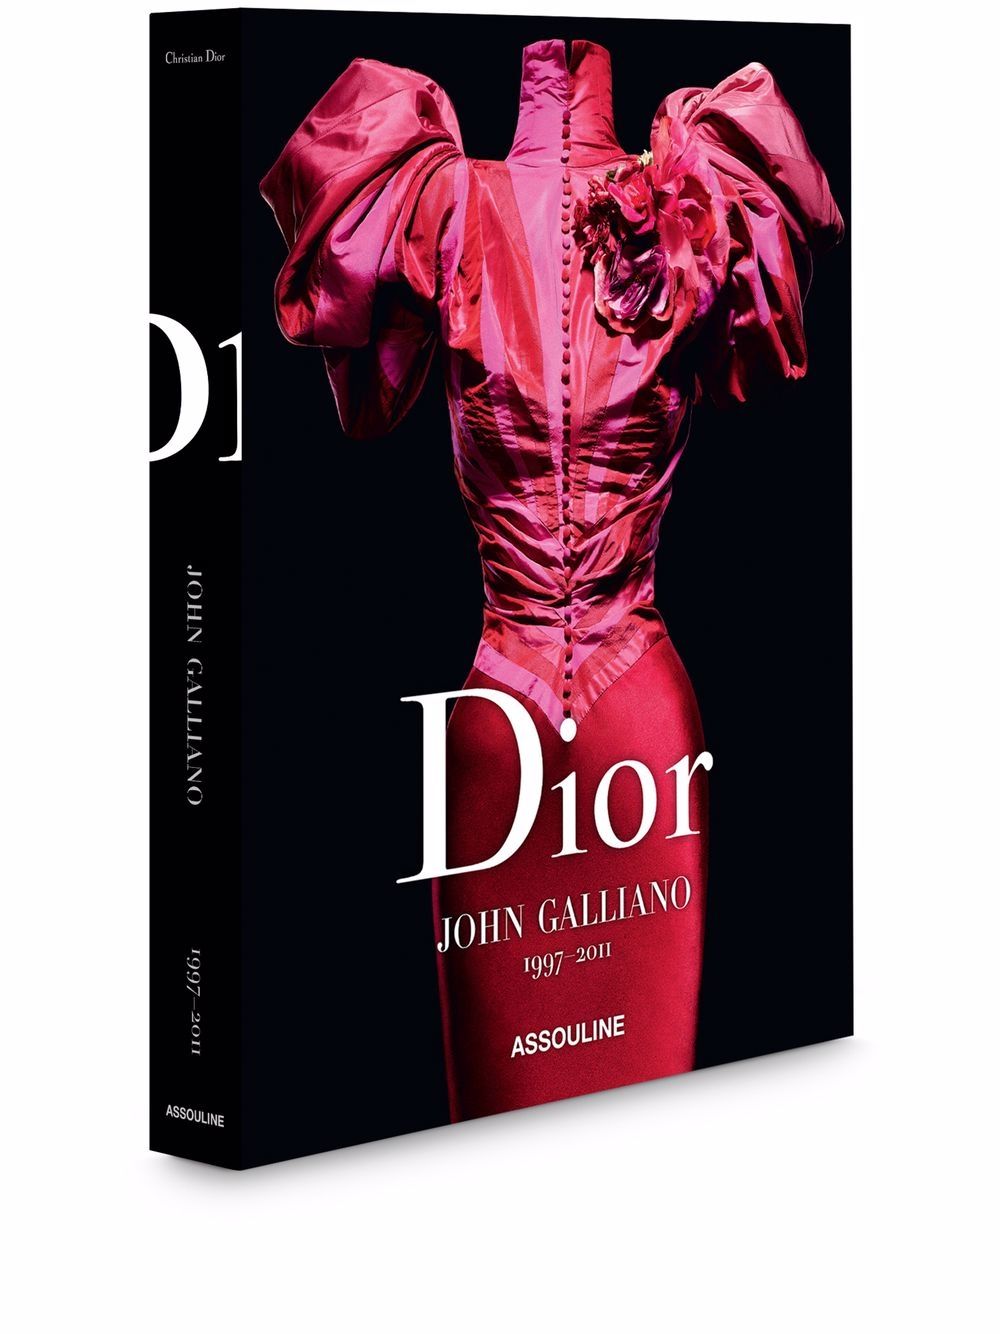 Image 1 of Assouline Dior by John Galliano book